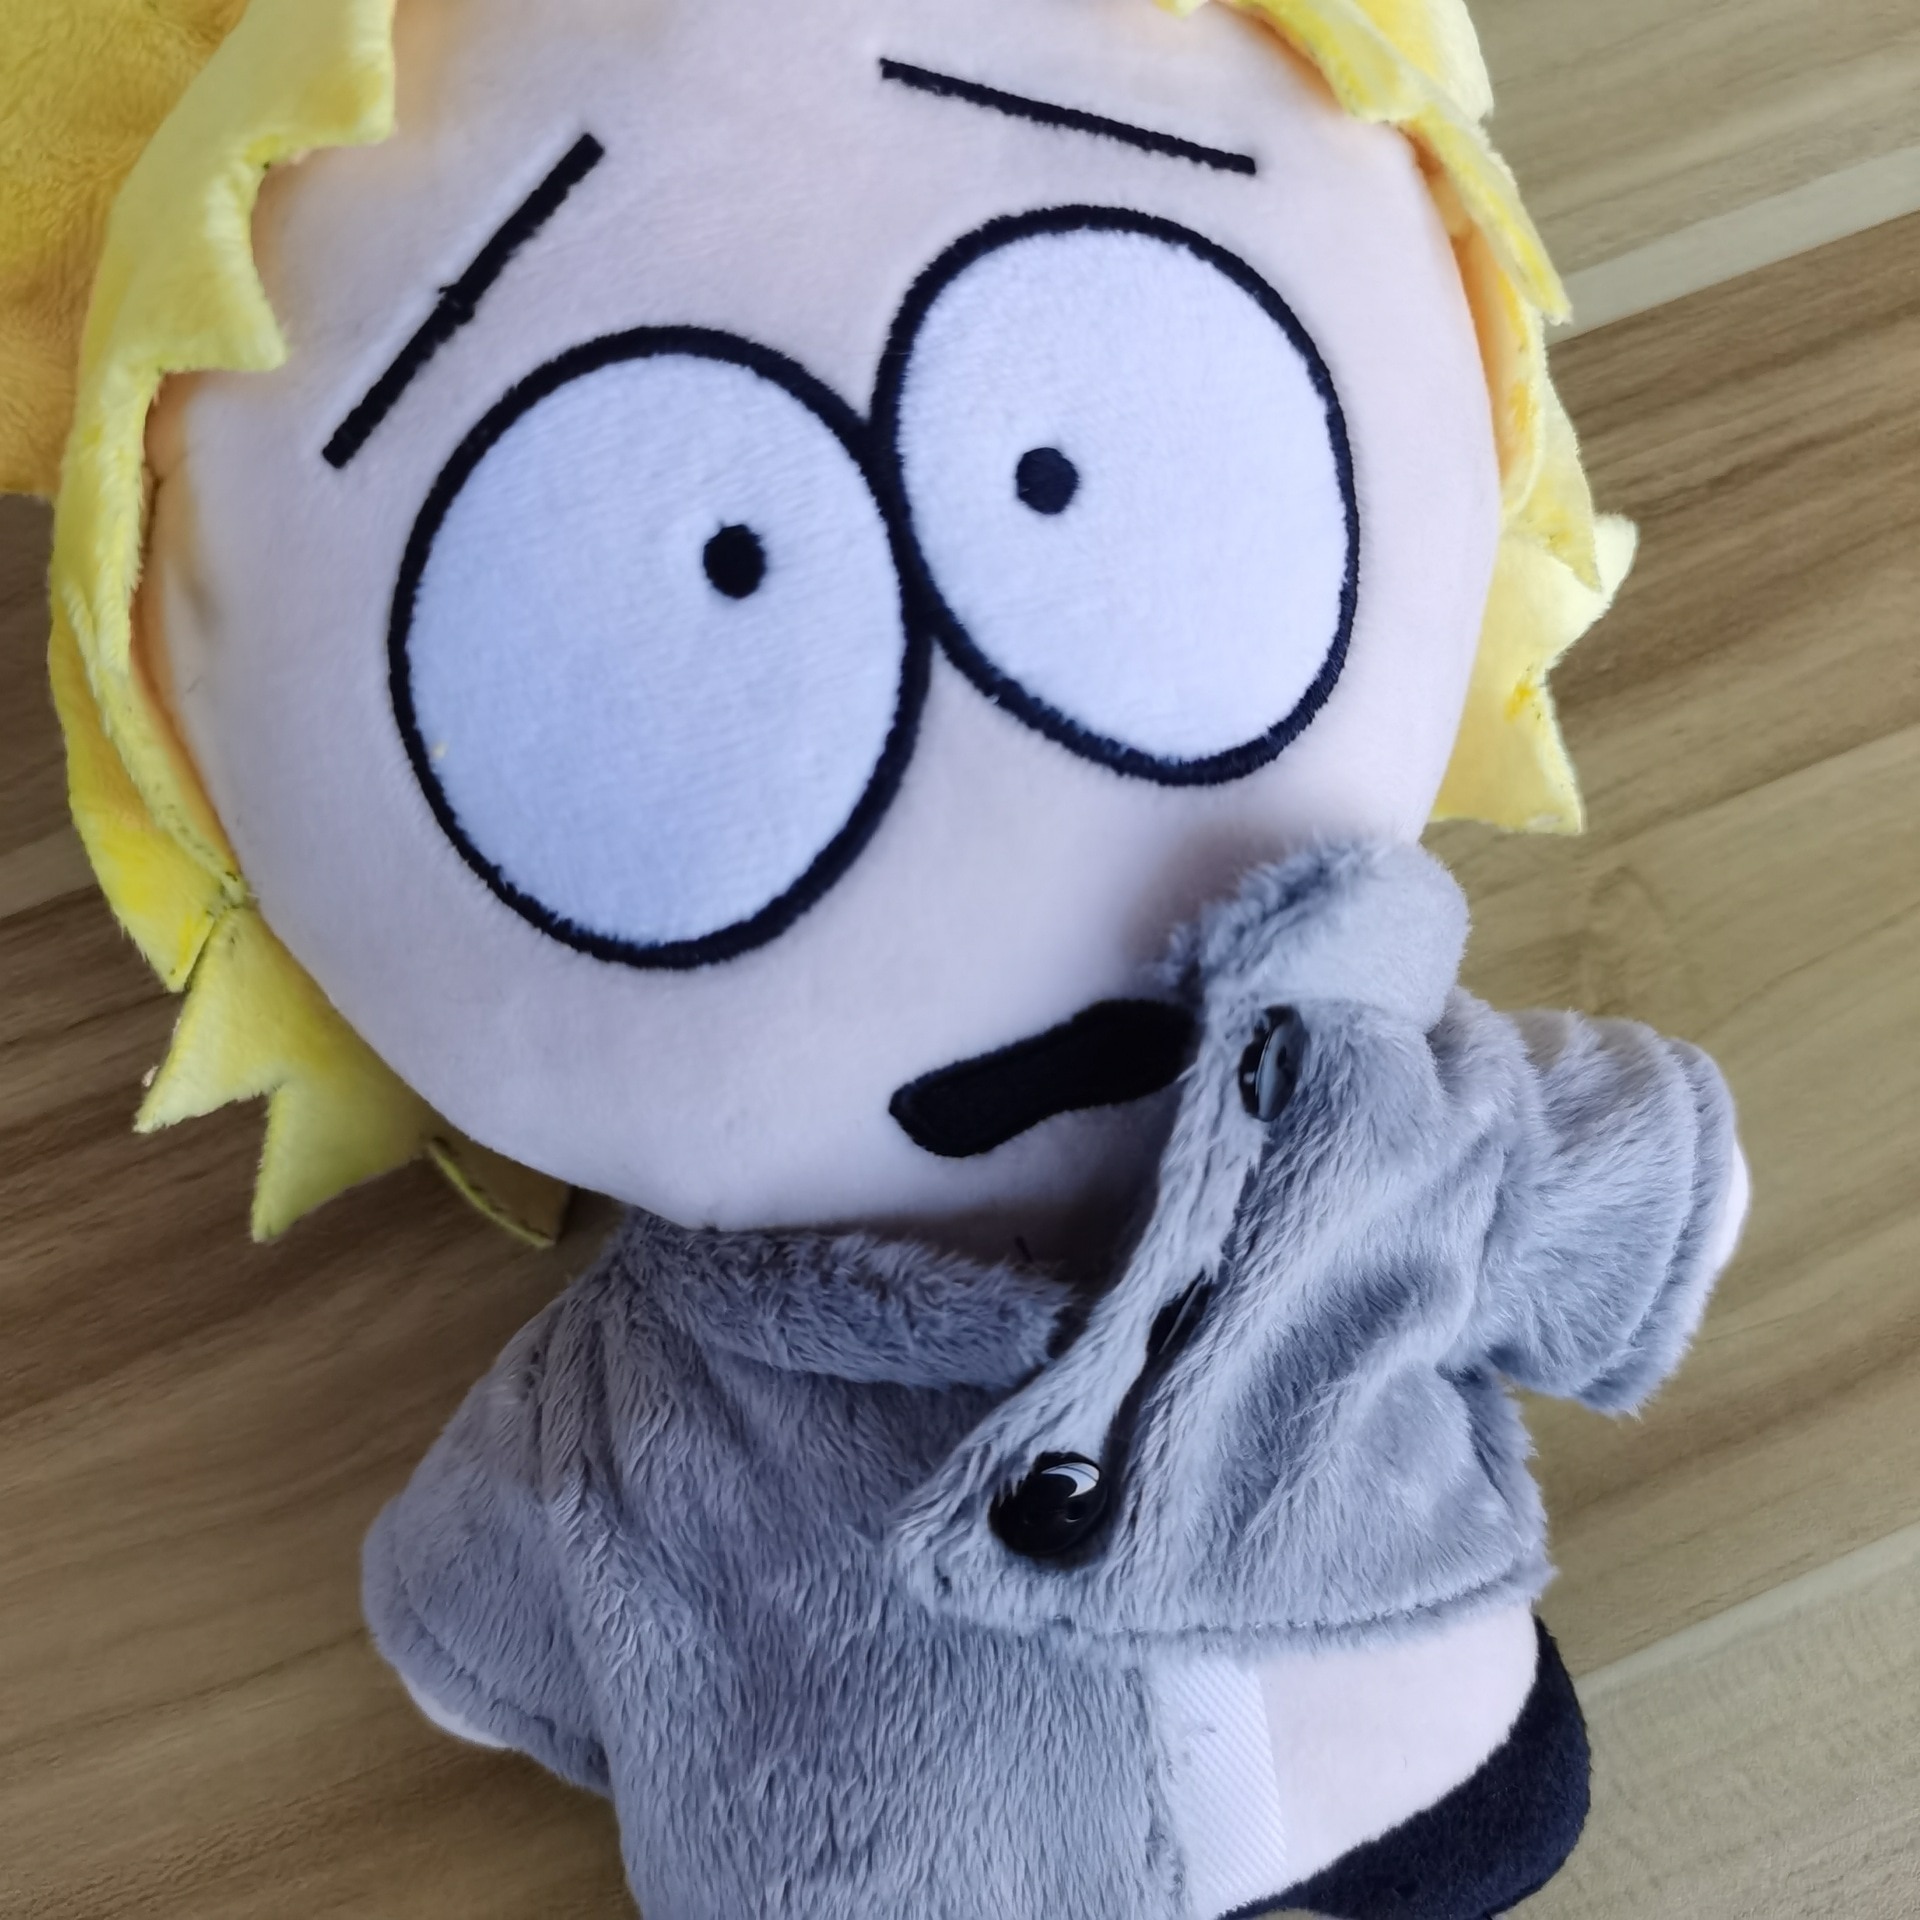 SouthPark Plush Toy Detachable Clothing Sweater Toy Soft Stuffed Plush Doll Toy for Anime Plush Gifts 3 - South Park Plush